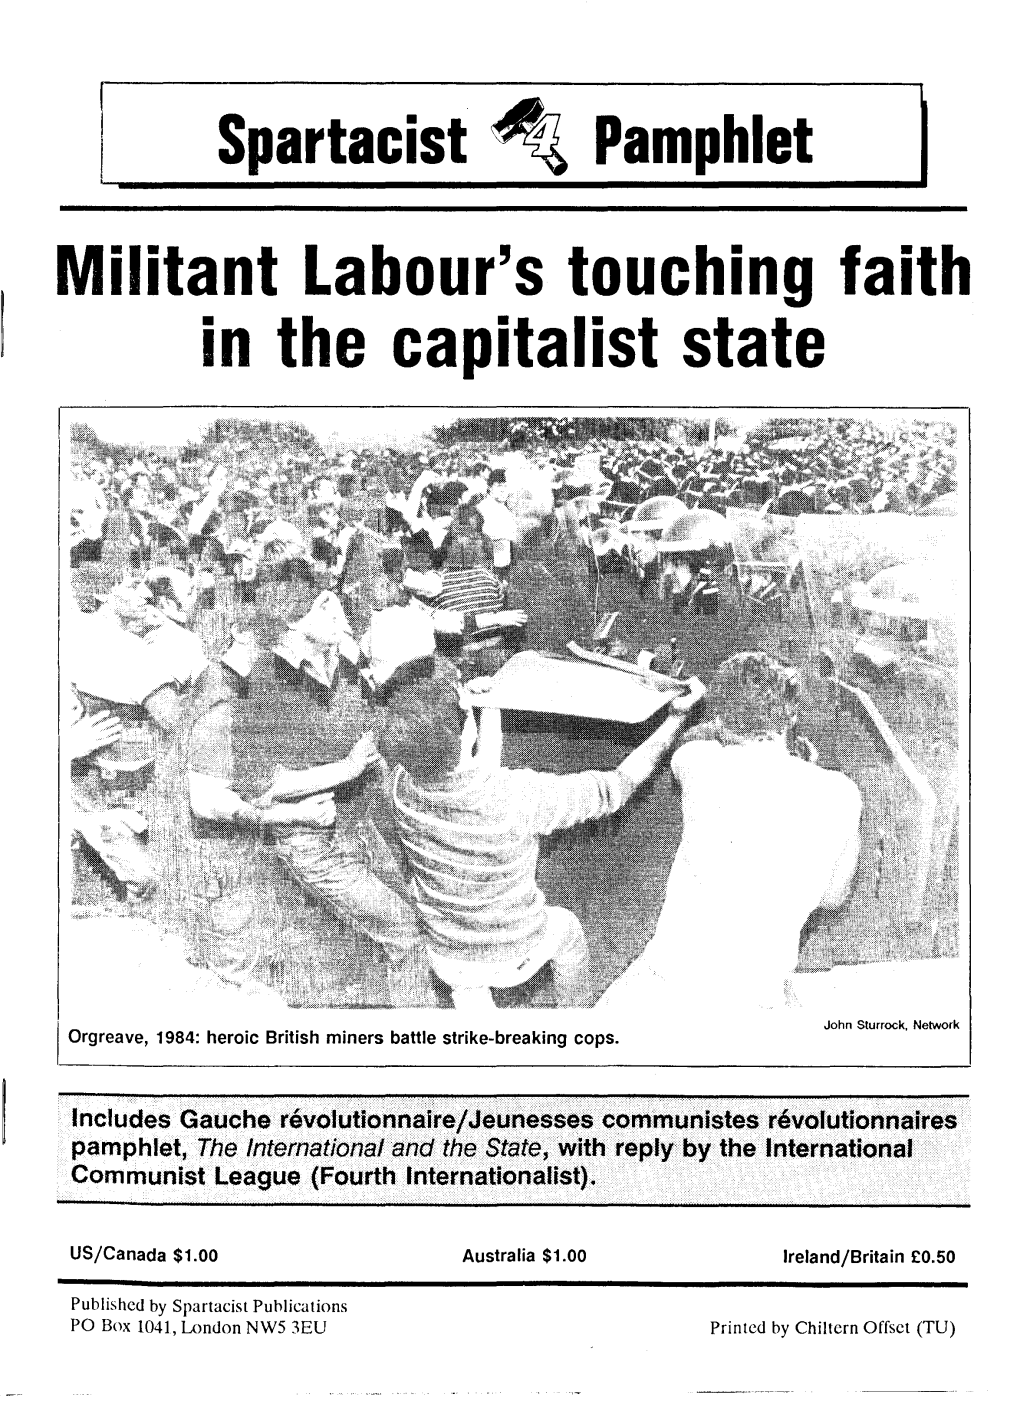 Labour Militant's Touching Faith in the Capitalist State